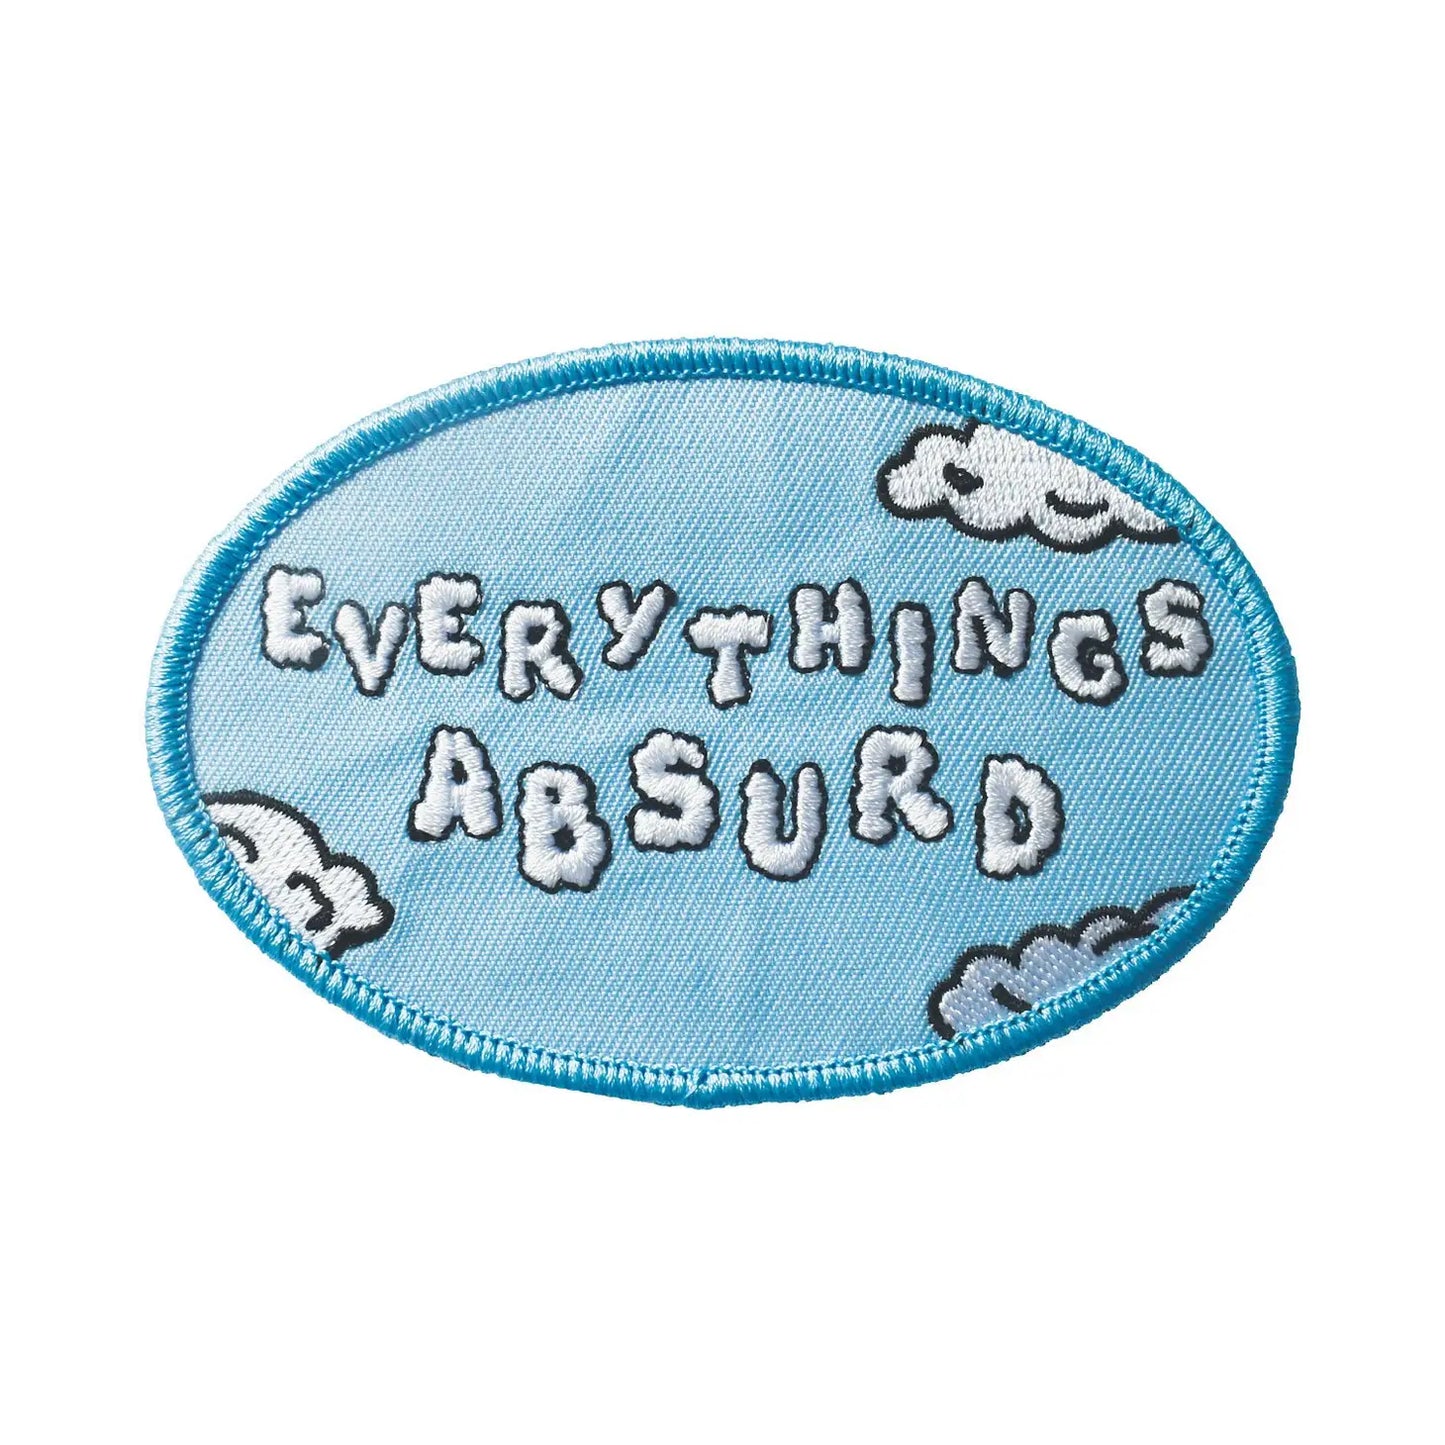 Everythings Absurd Patch